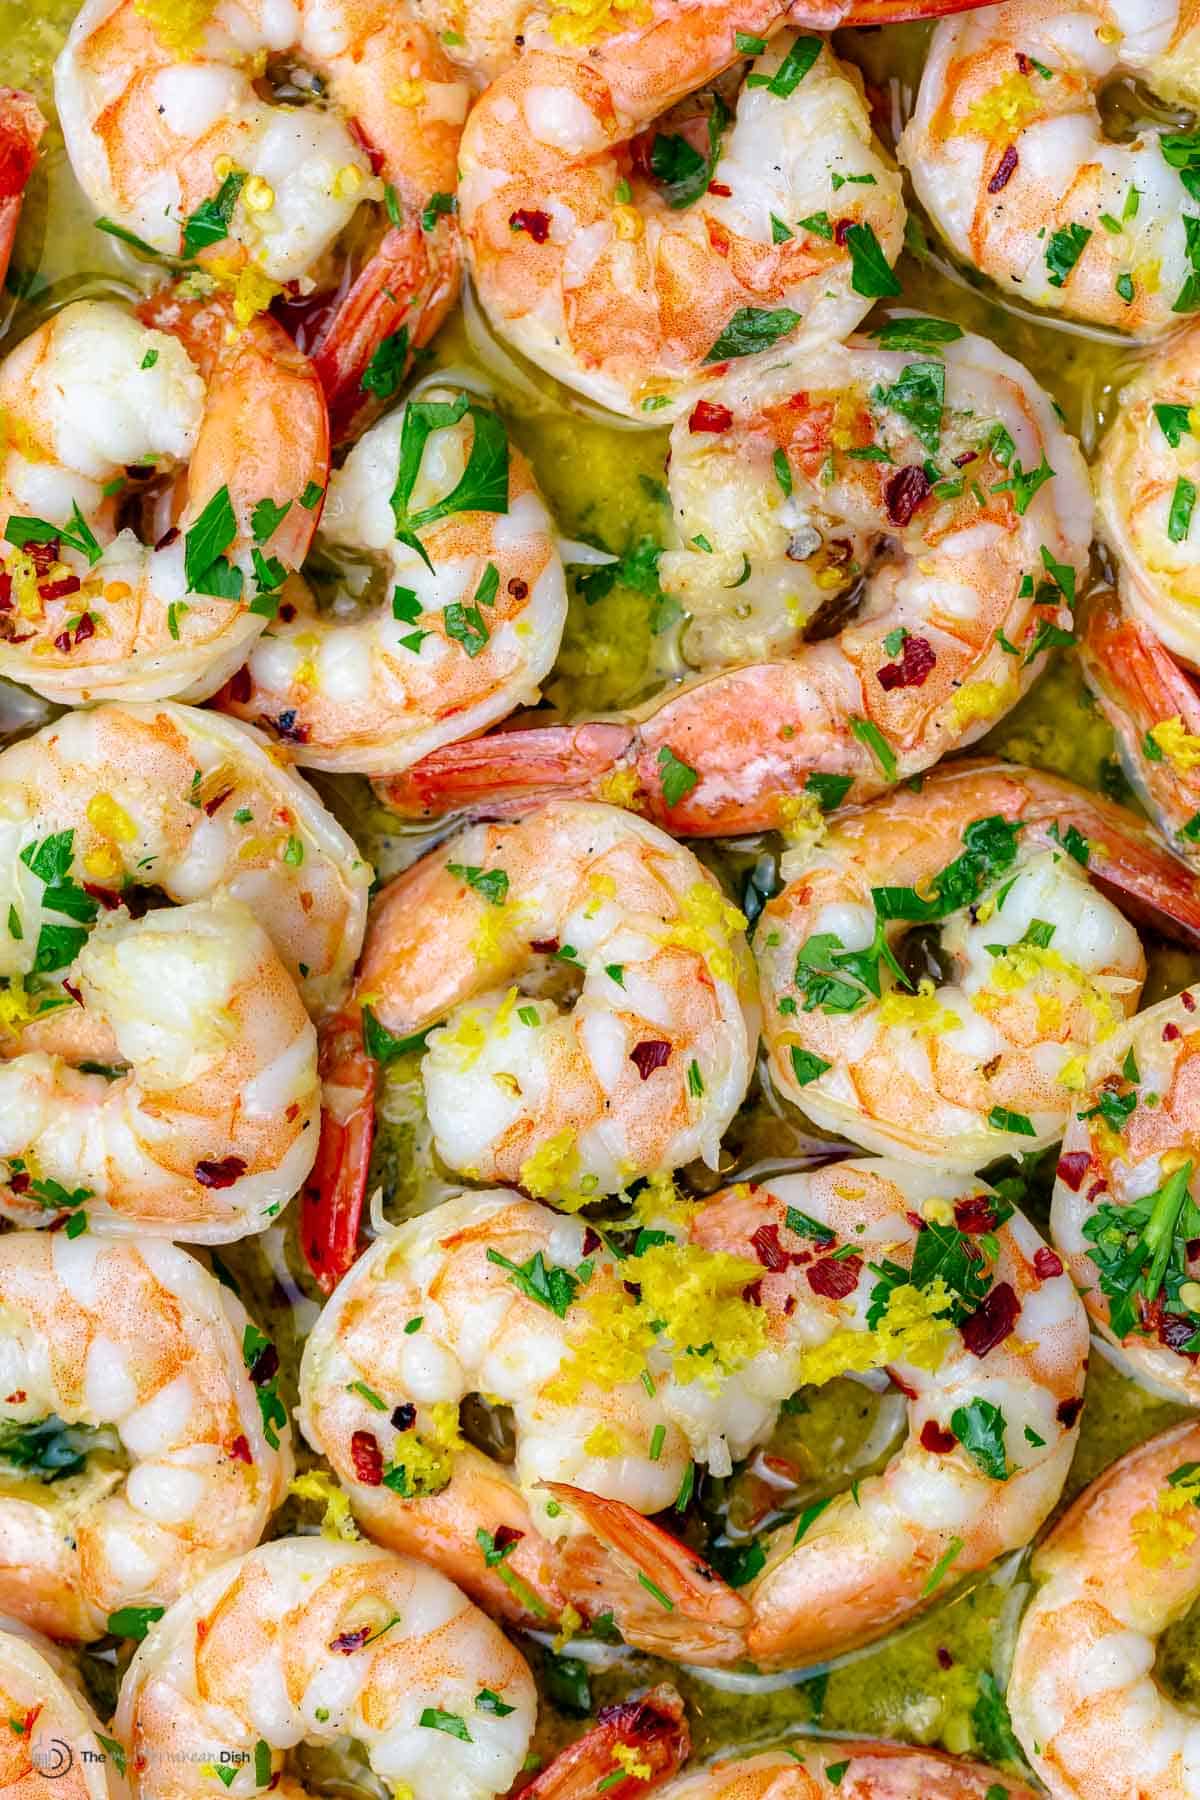 Shrimp with butter and garlic topped with parsley